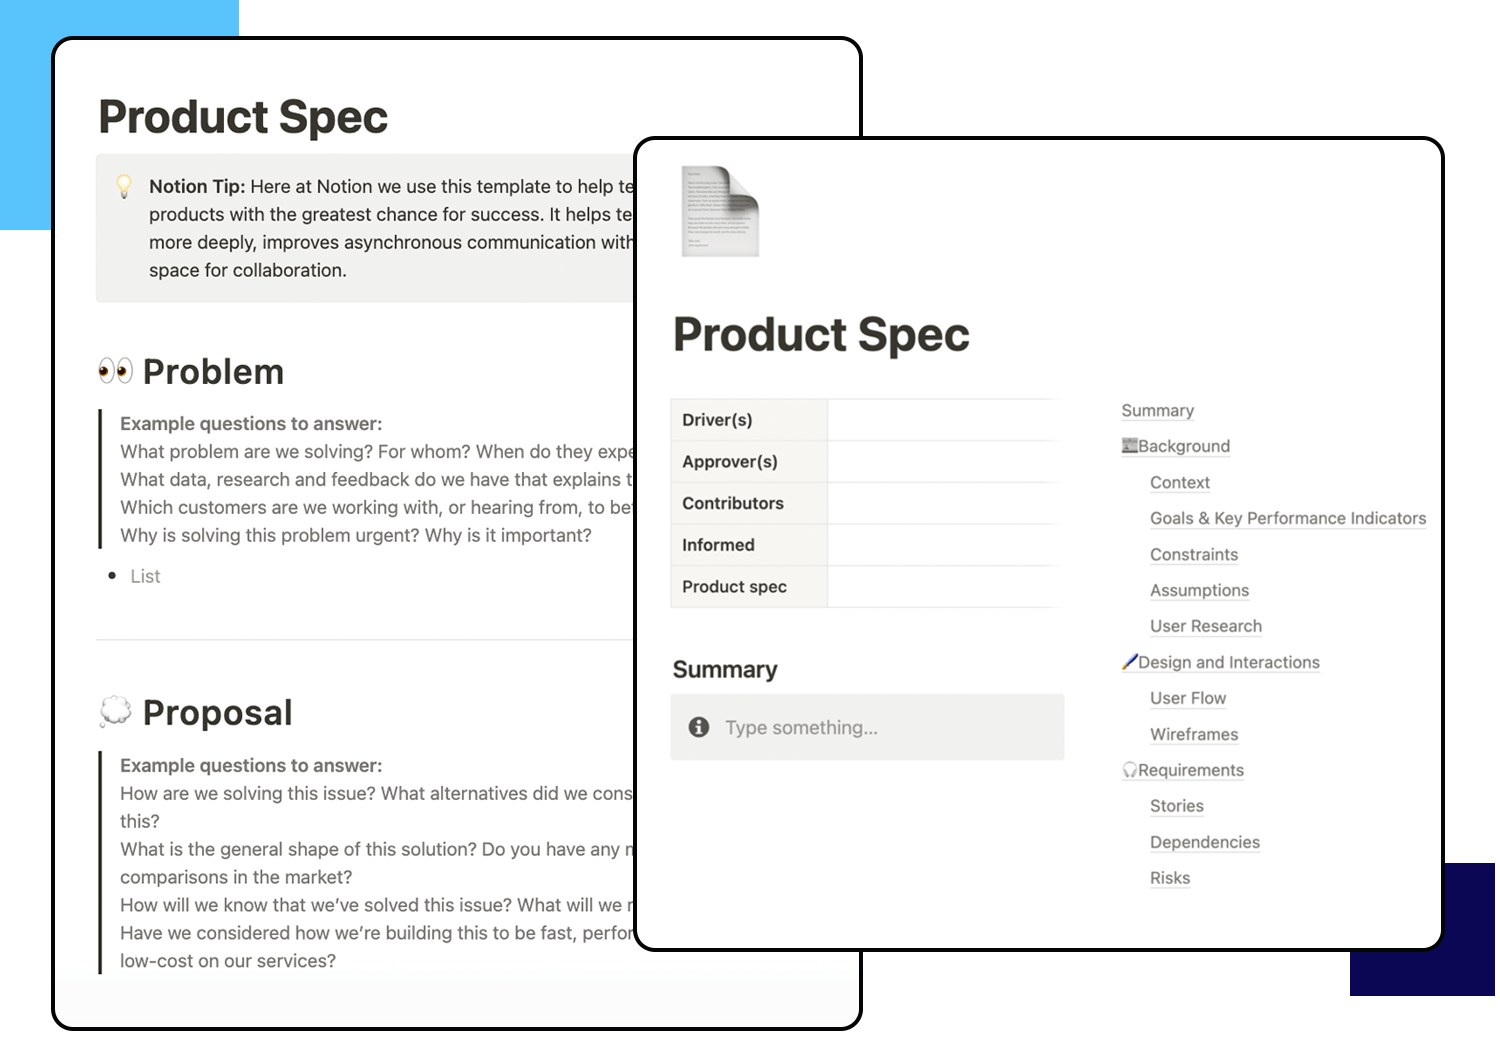 Notion product spec template with sections for problem definition, proposals, and project details